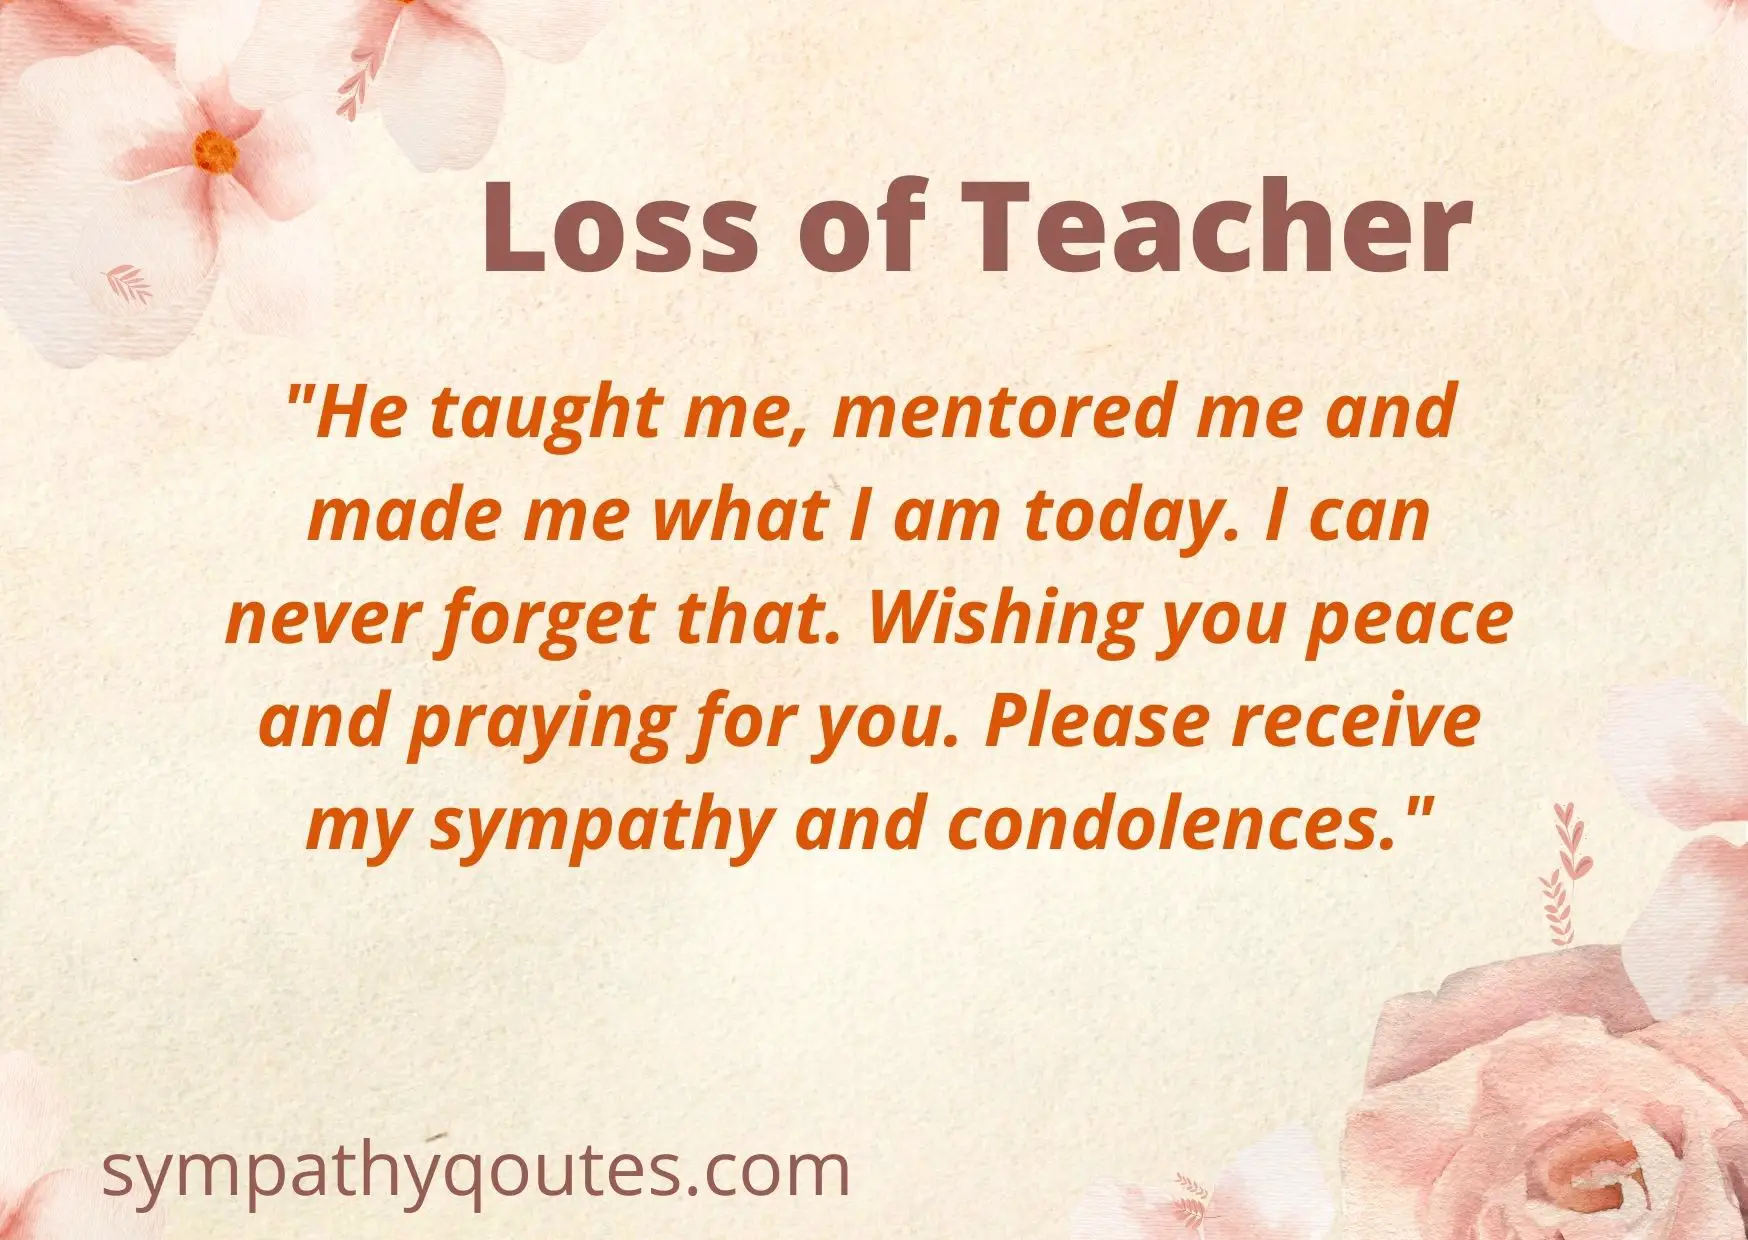 Condolence Messages for Loss of Teacher